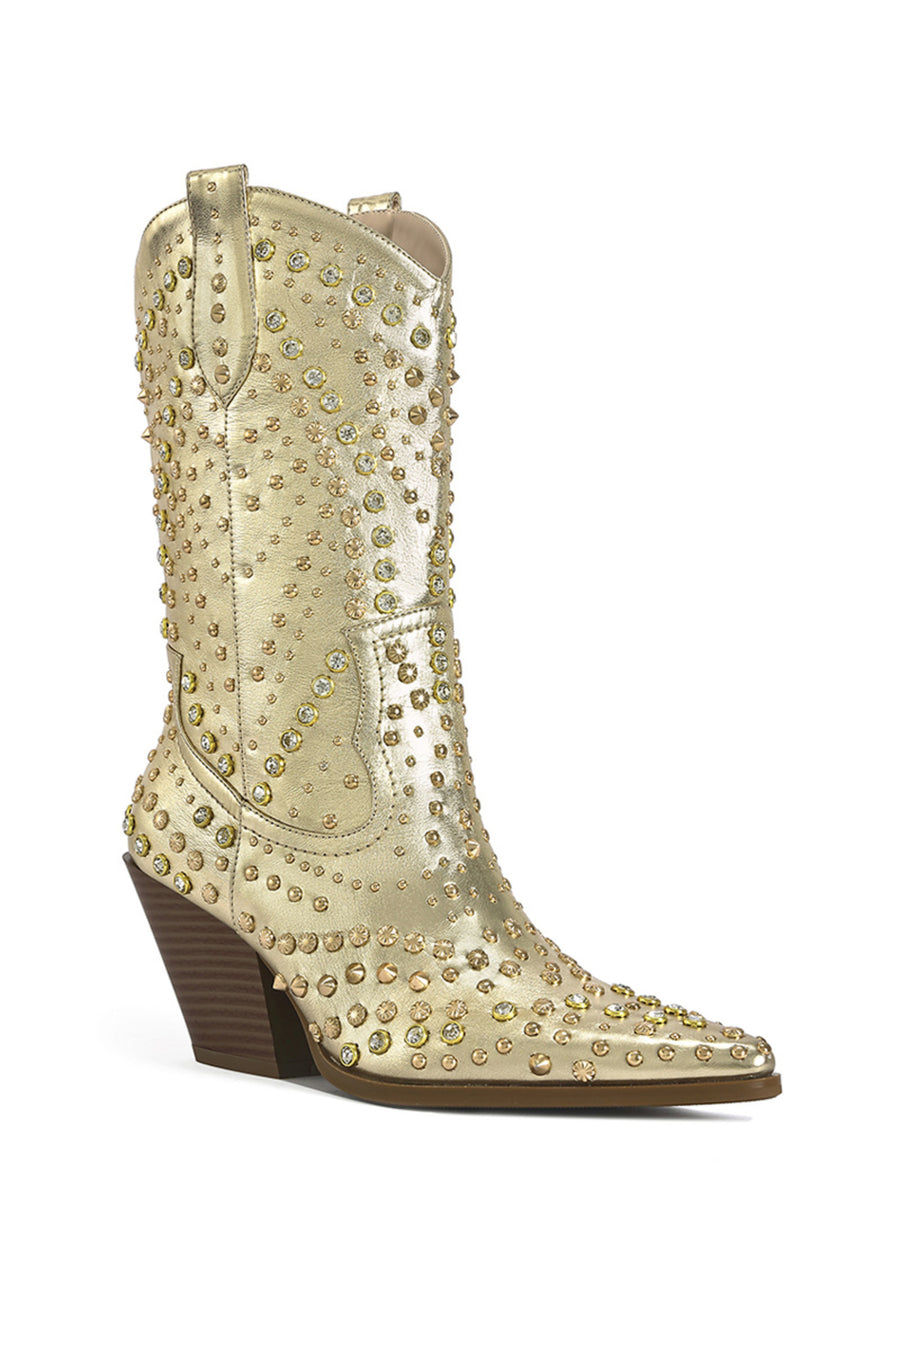 gold western inspired cowboy boot with studs and rhinestone embellishments